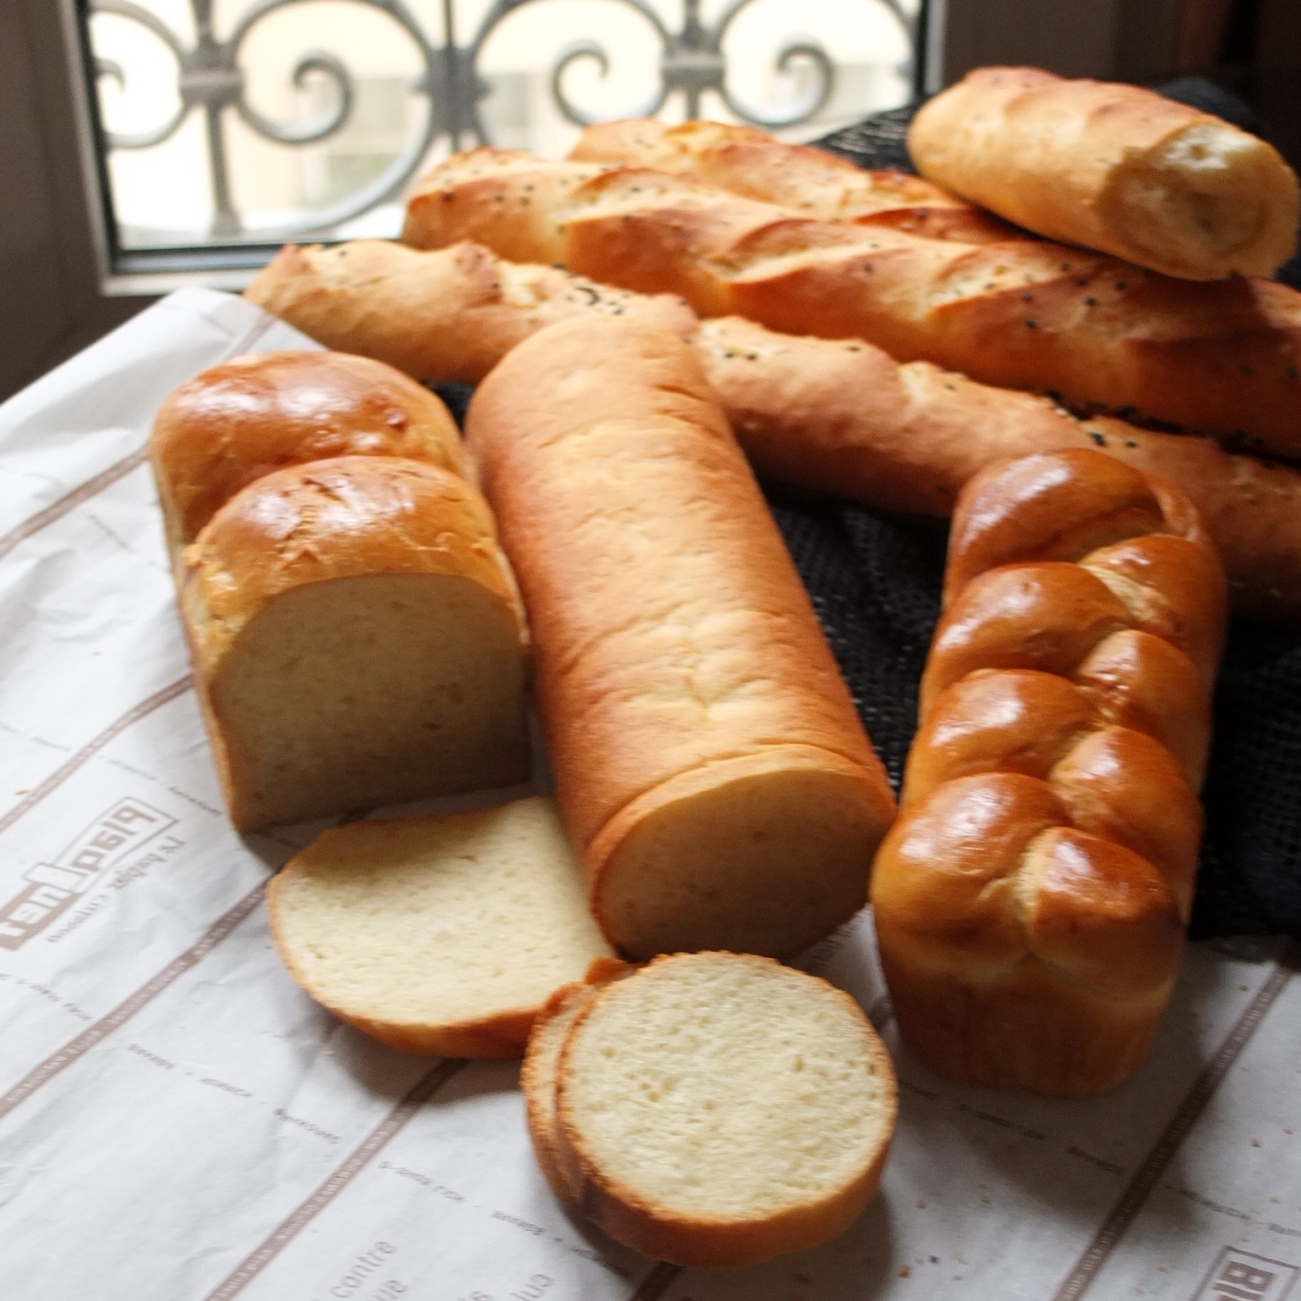 Pain de mie and baguettes - French breads